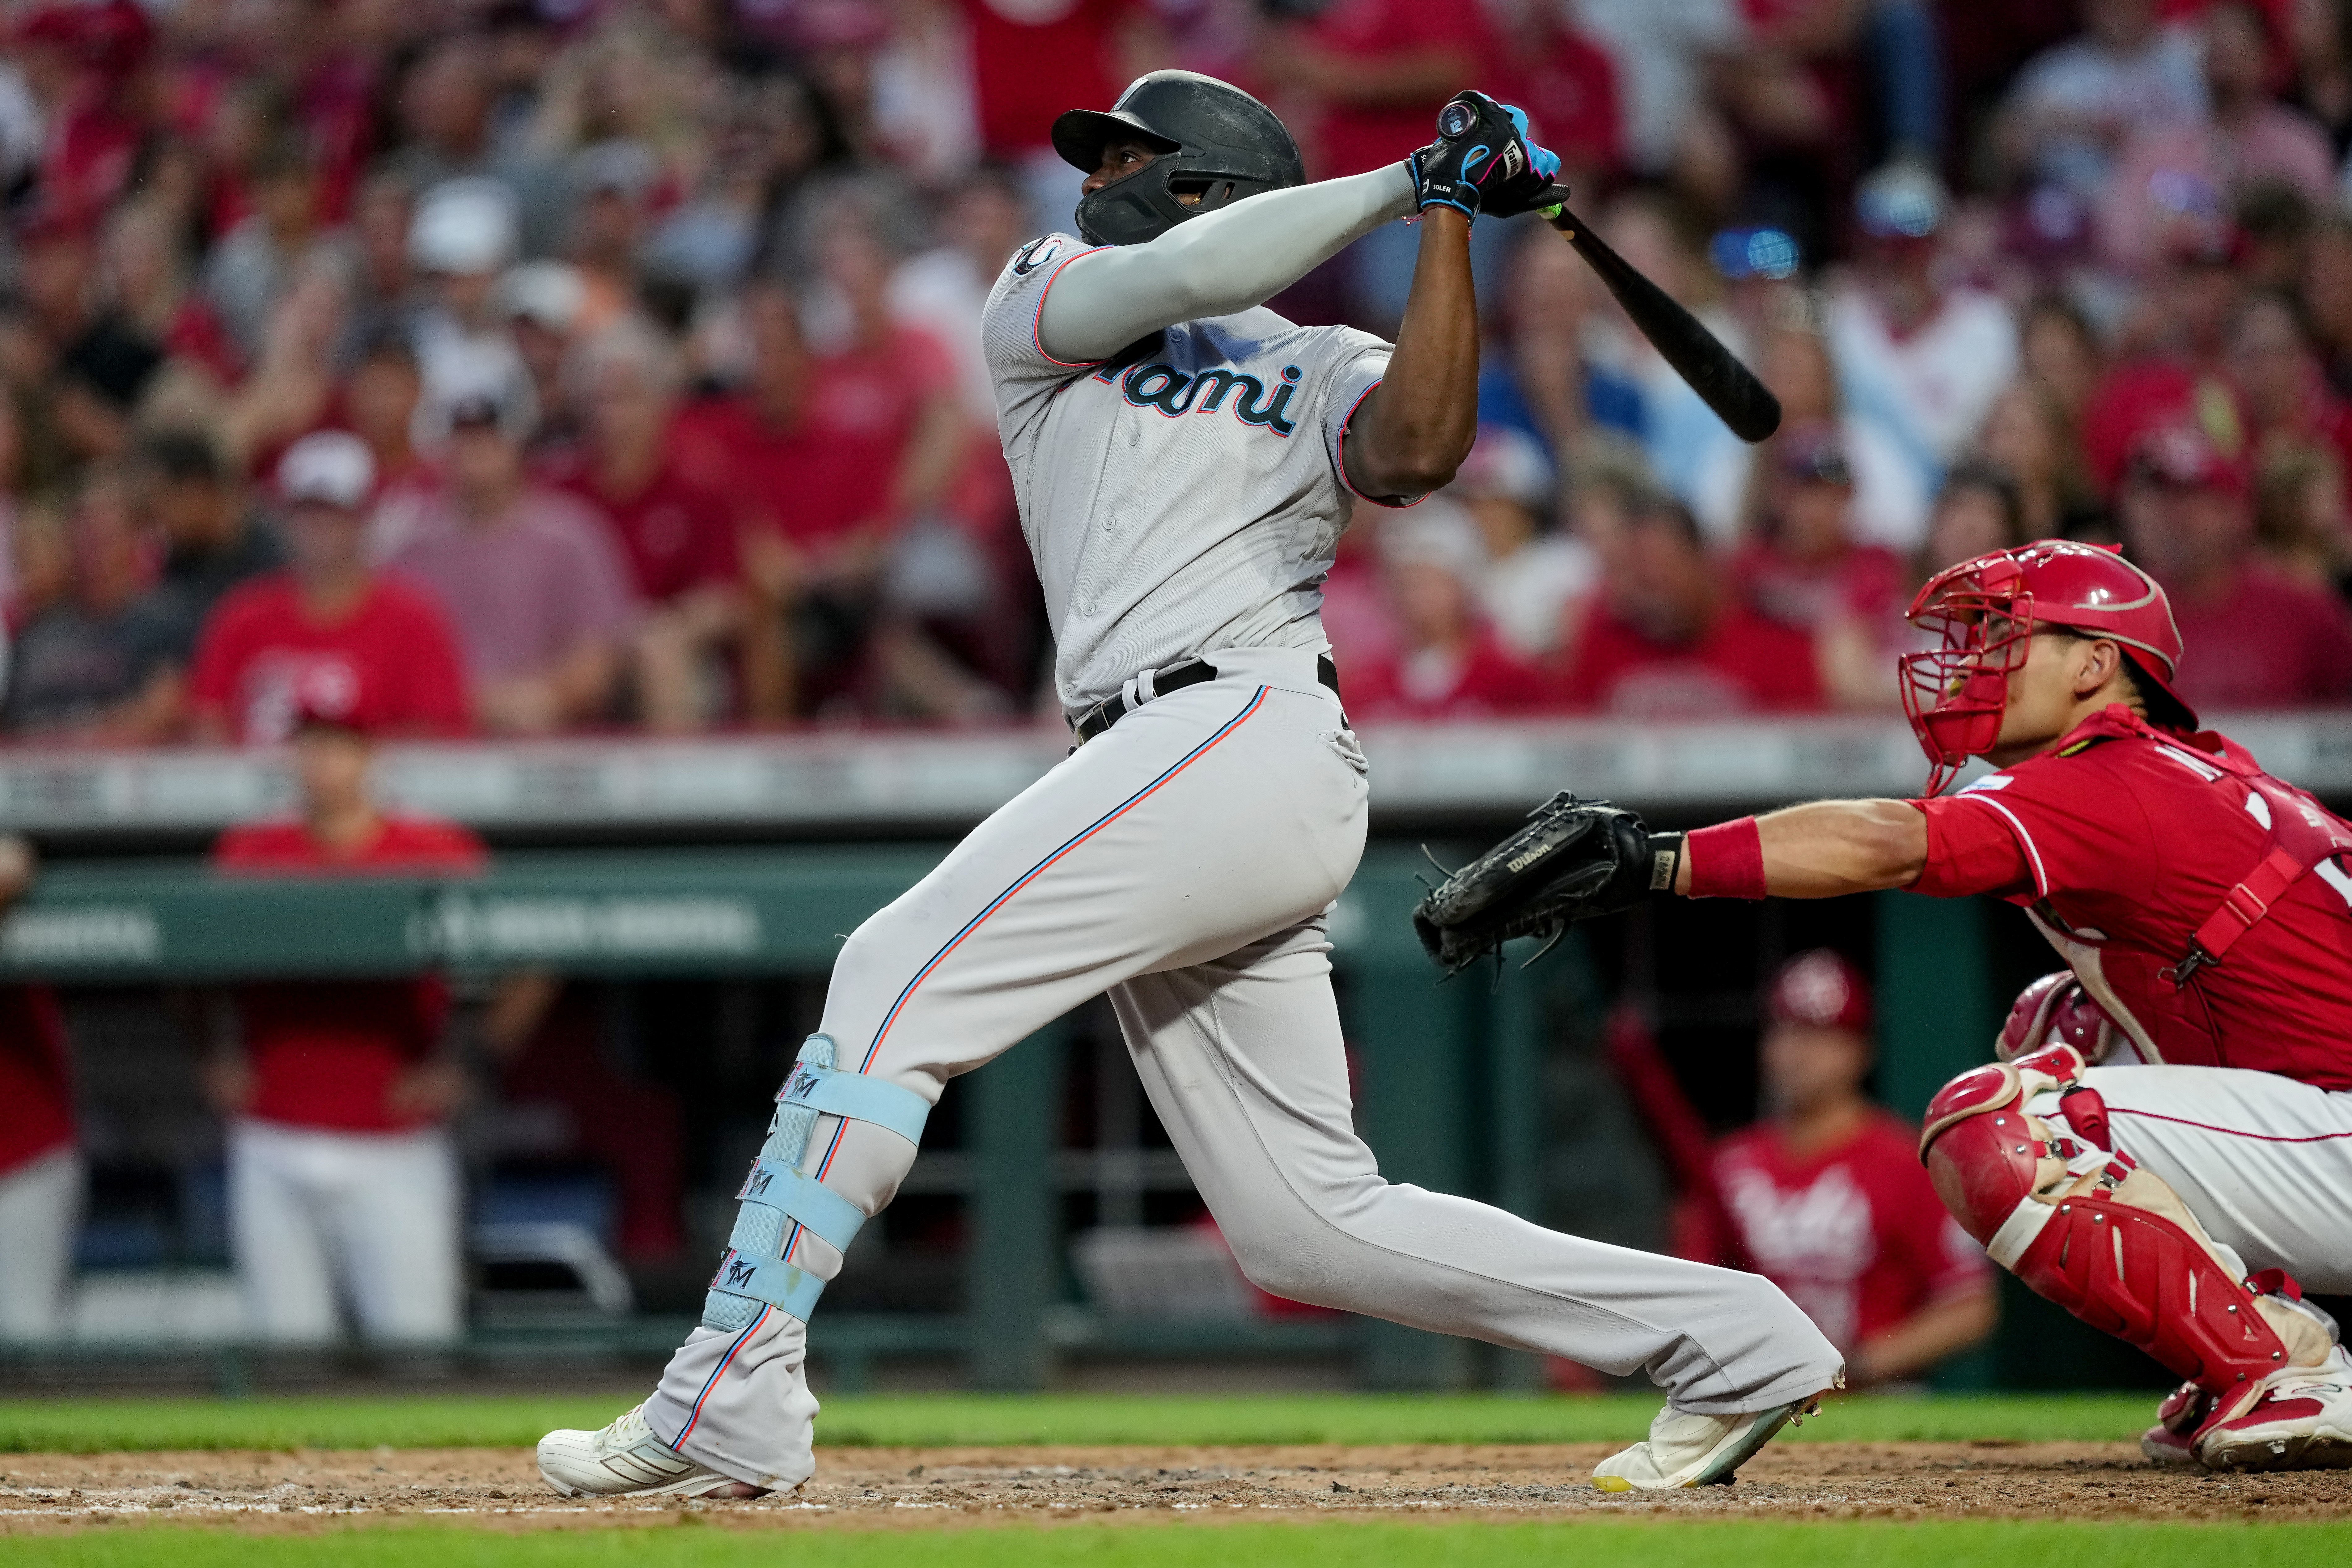 Jorge Soler's homer helps the Marlins rally for a 3-2 win over the Reds